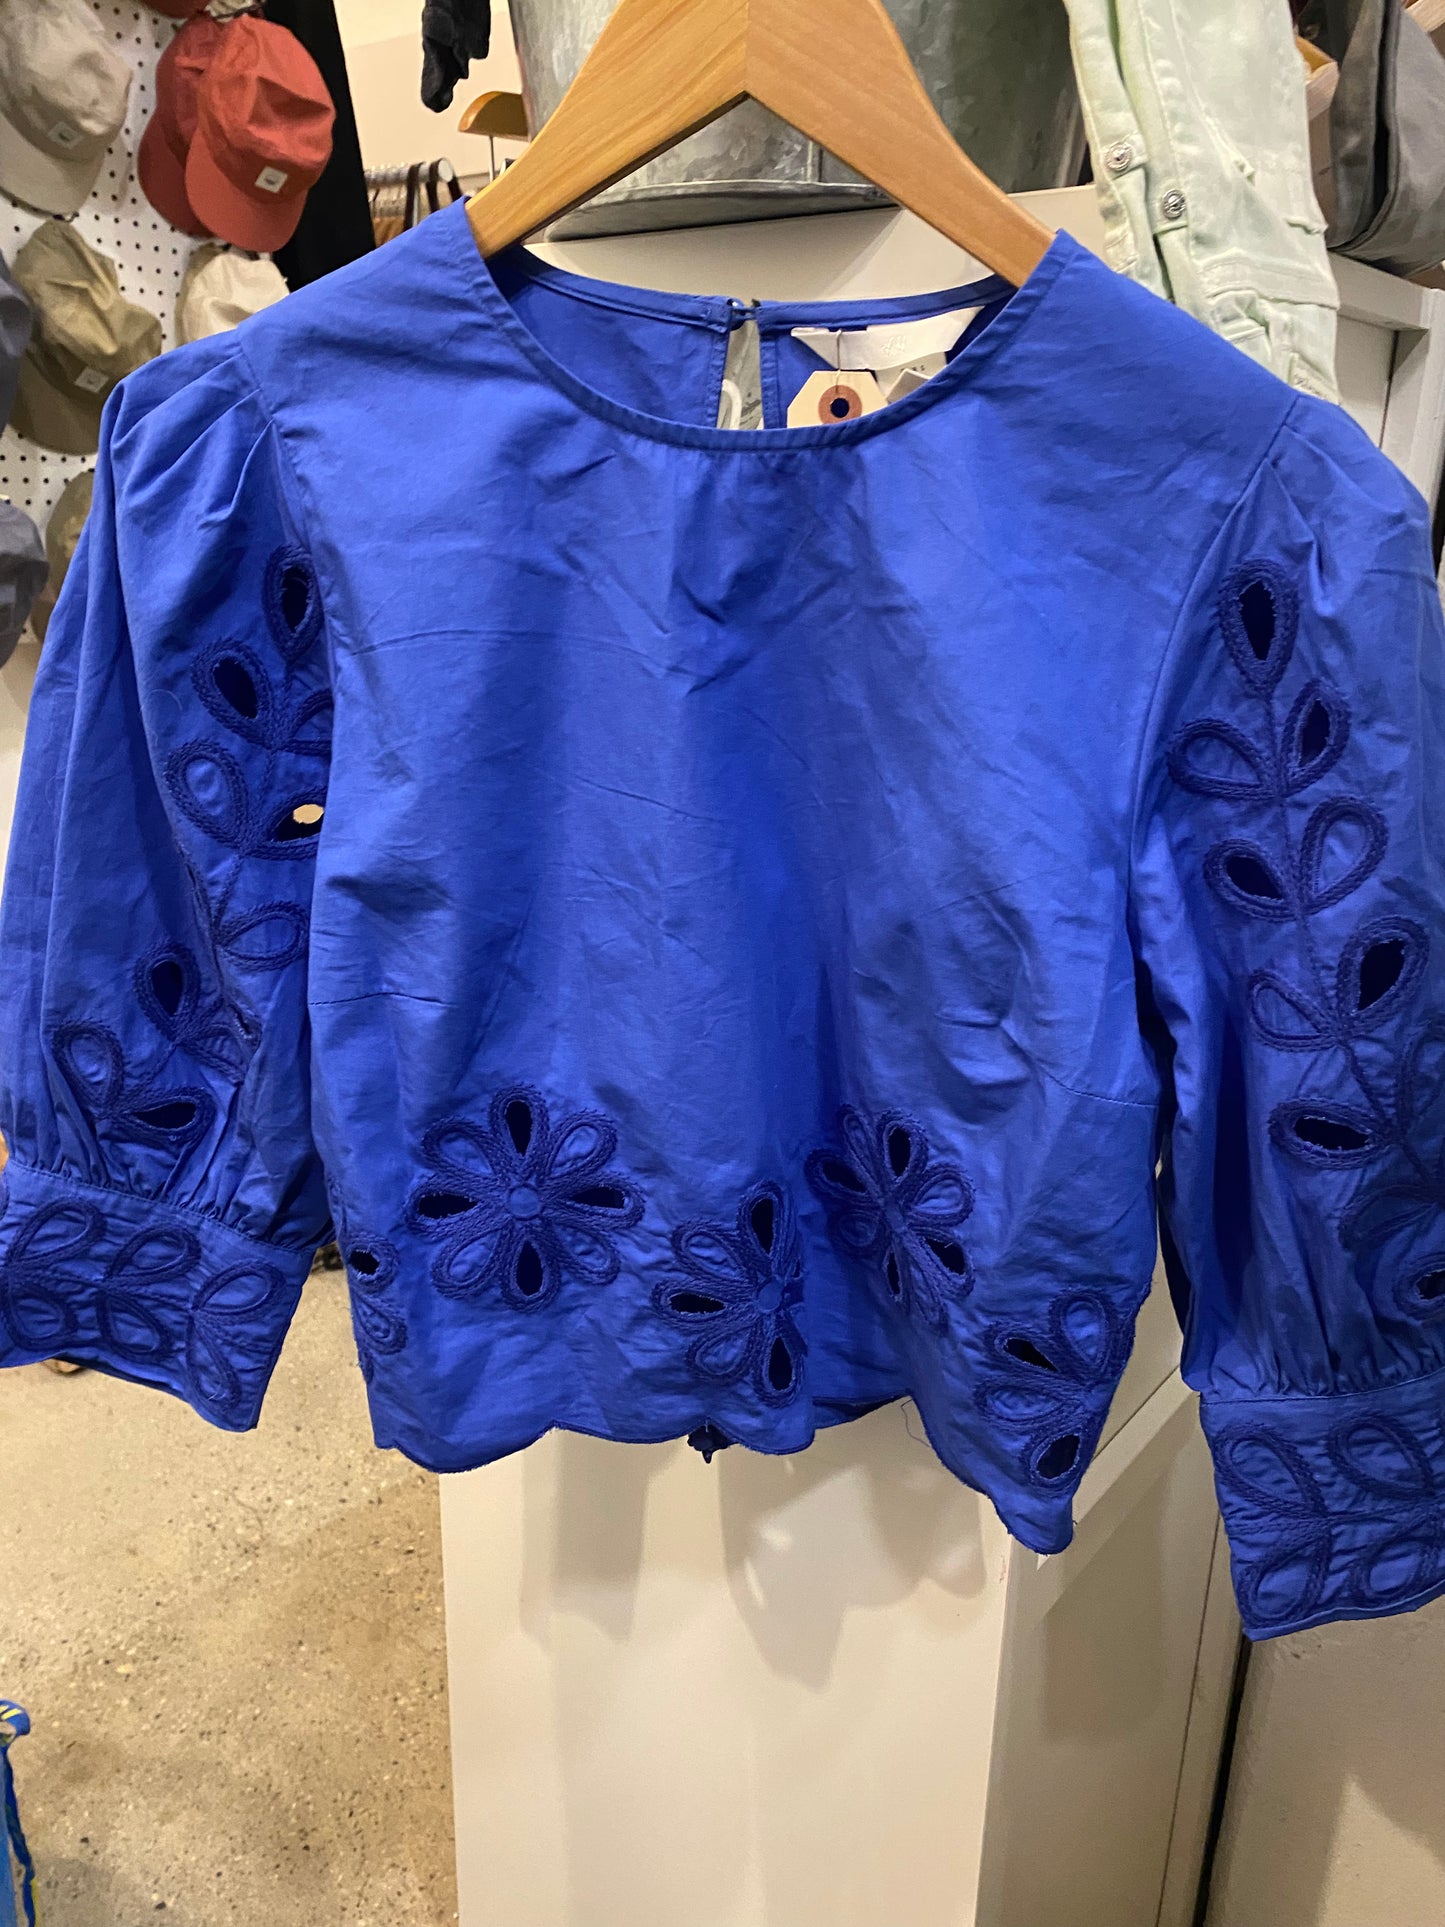 Consignment 3197-01 - H&M blue blouse with cut outs, sz S